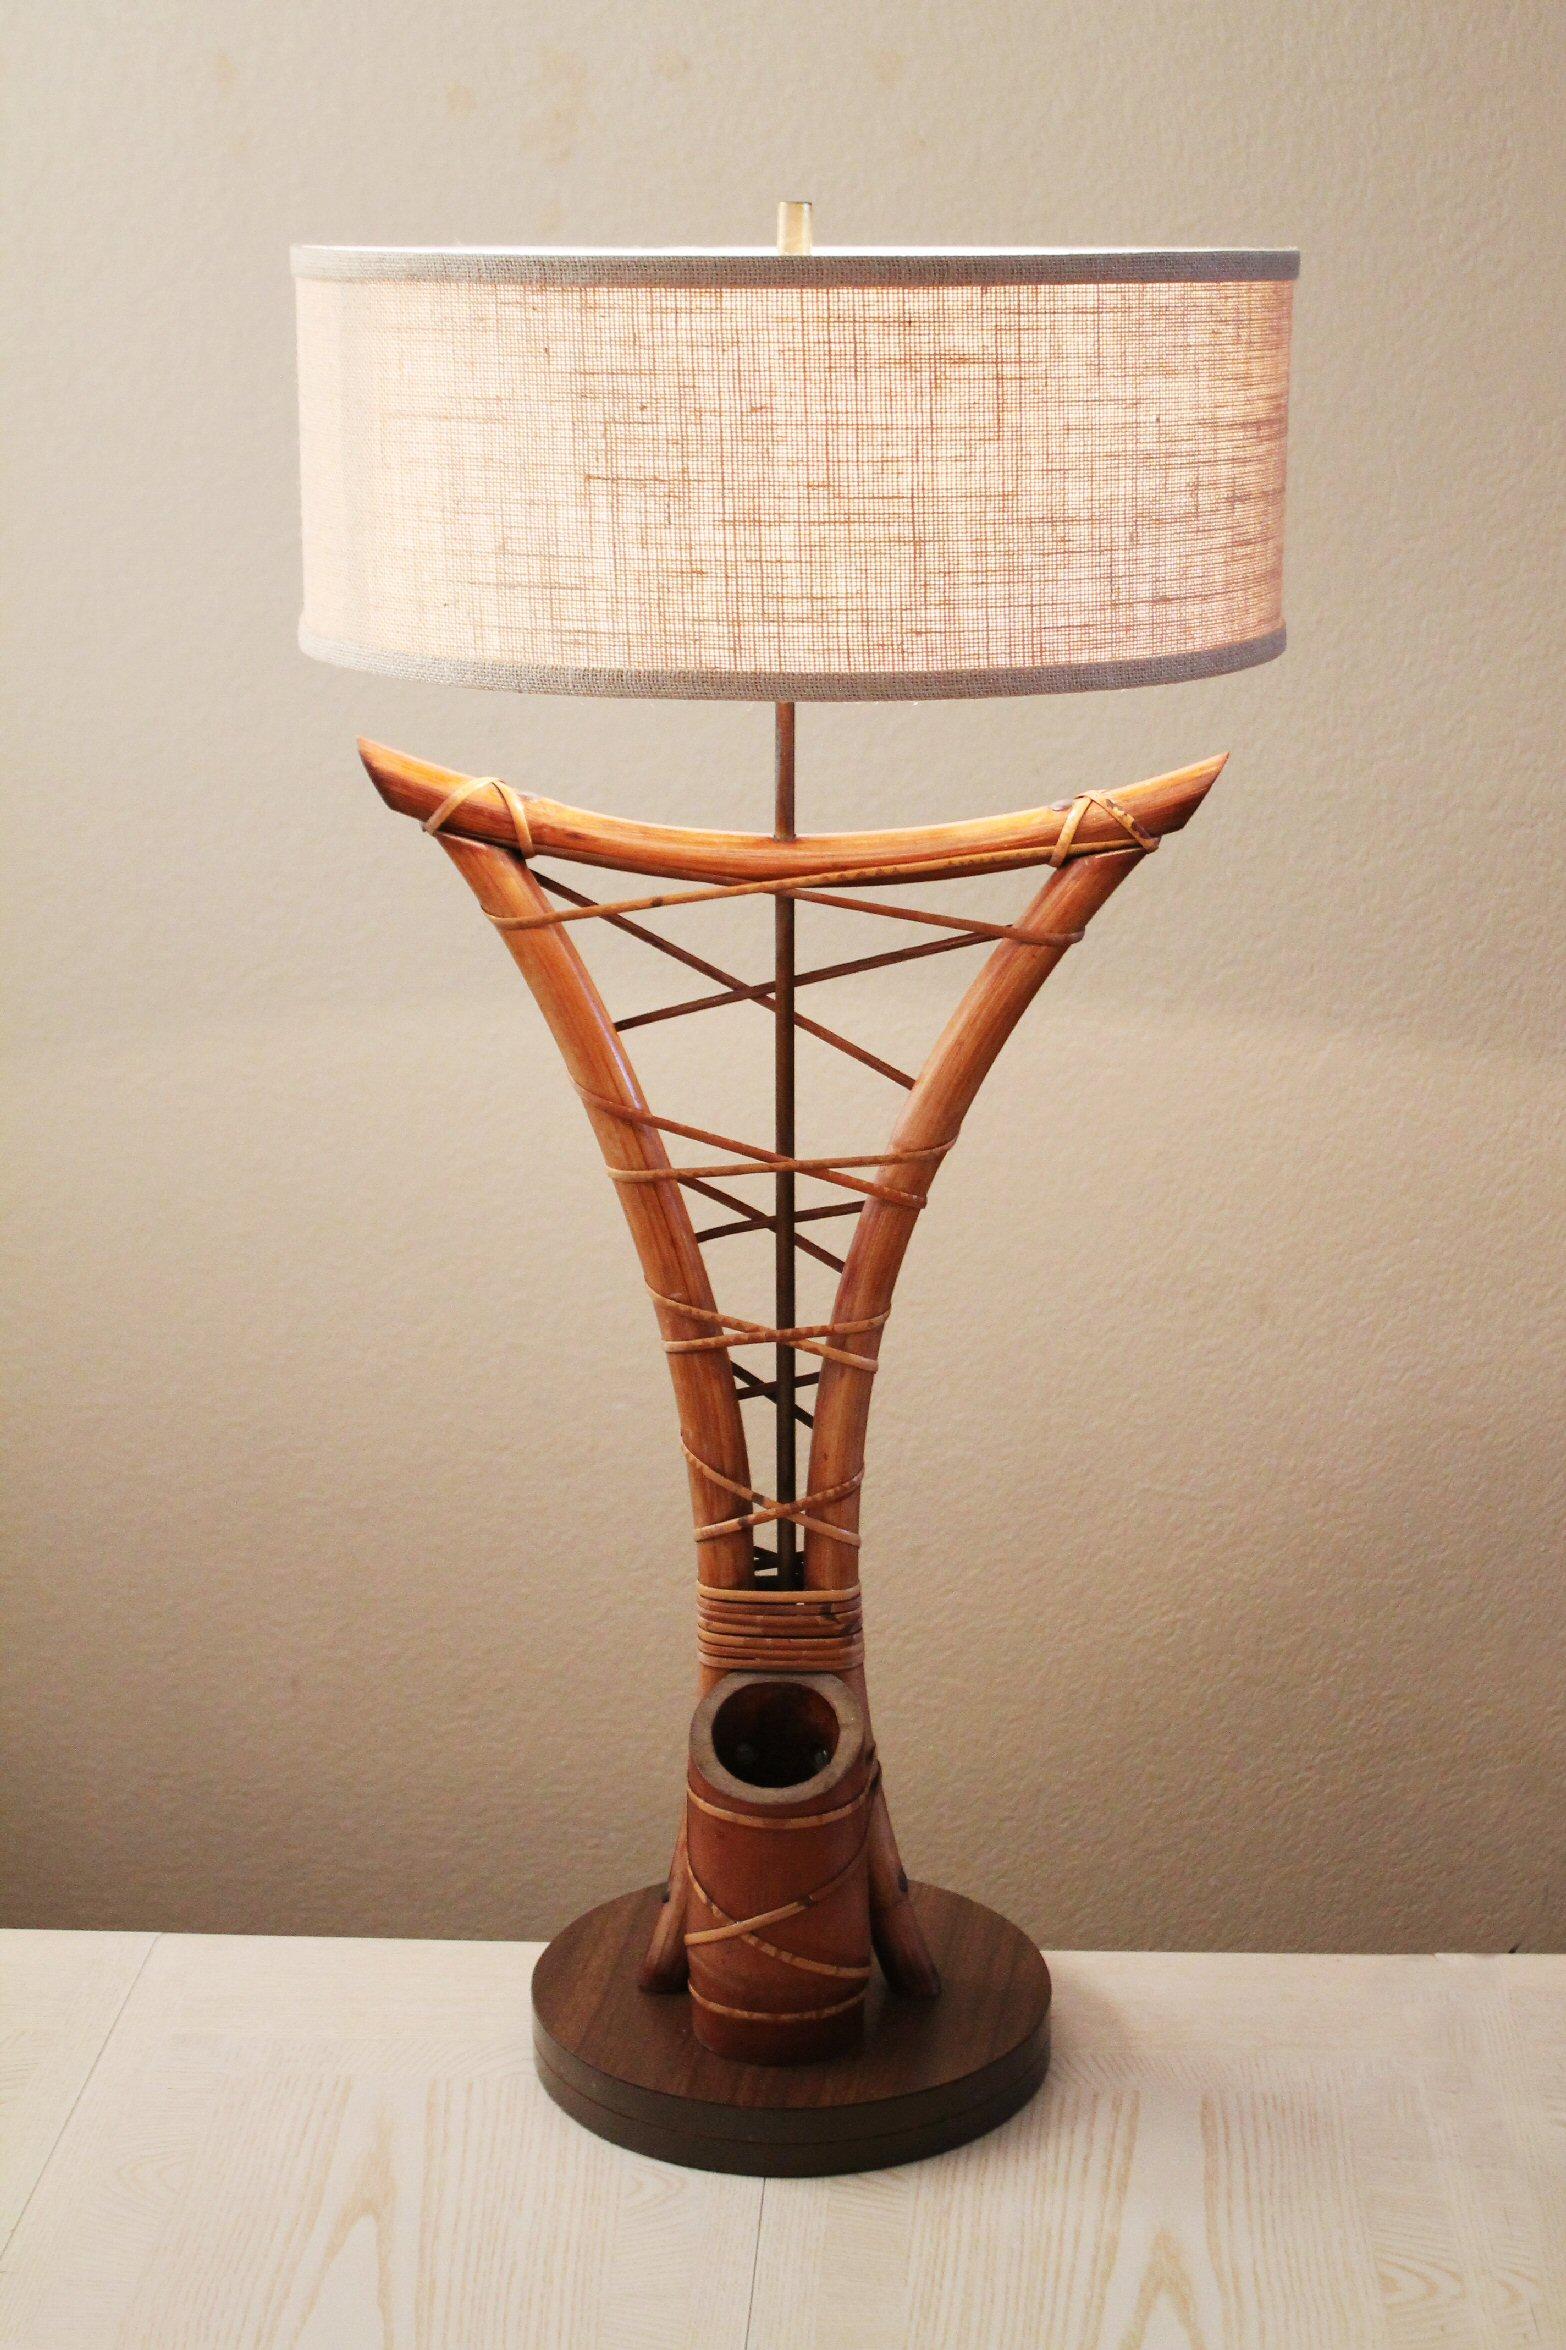 MONUMENTAL


BAMBOO & WALNUT
POLYNESIAN STYLE
TABLE LAMP

In the Manner of McGuire & Gabriella Crespi

Circa 1950

At the very beginning of the Post-War Polynesian or South Pacific craze which took over America during the forties and fifties, there